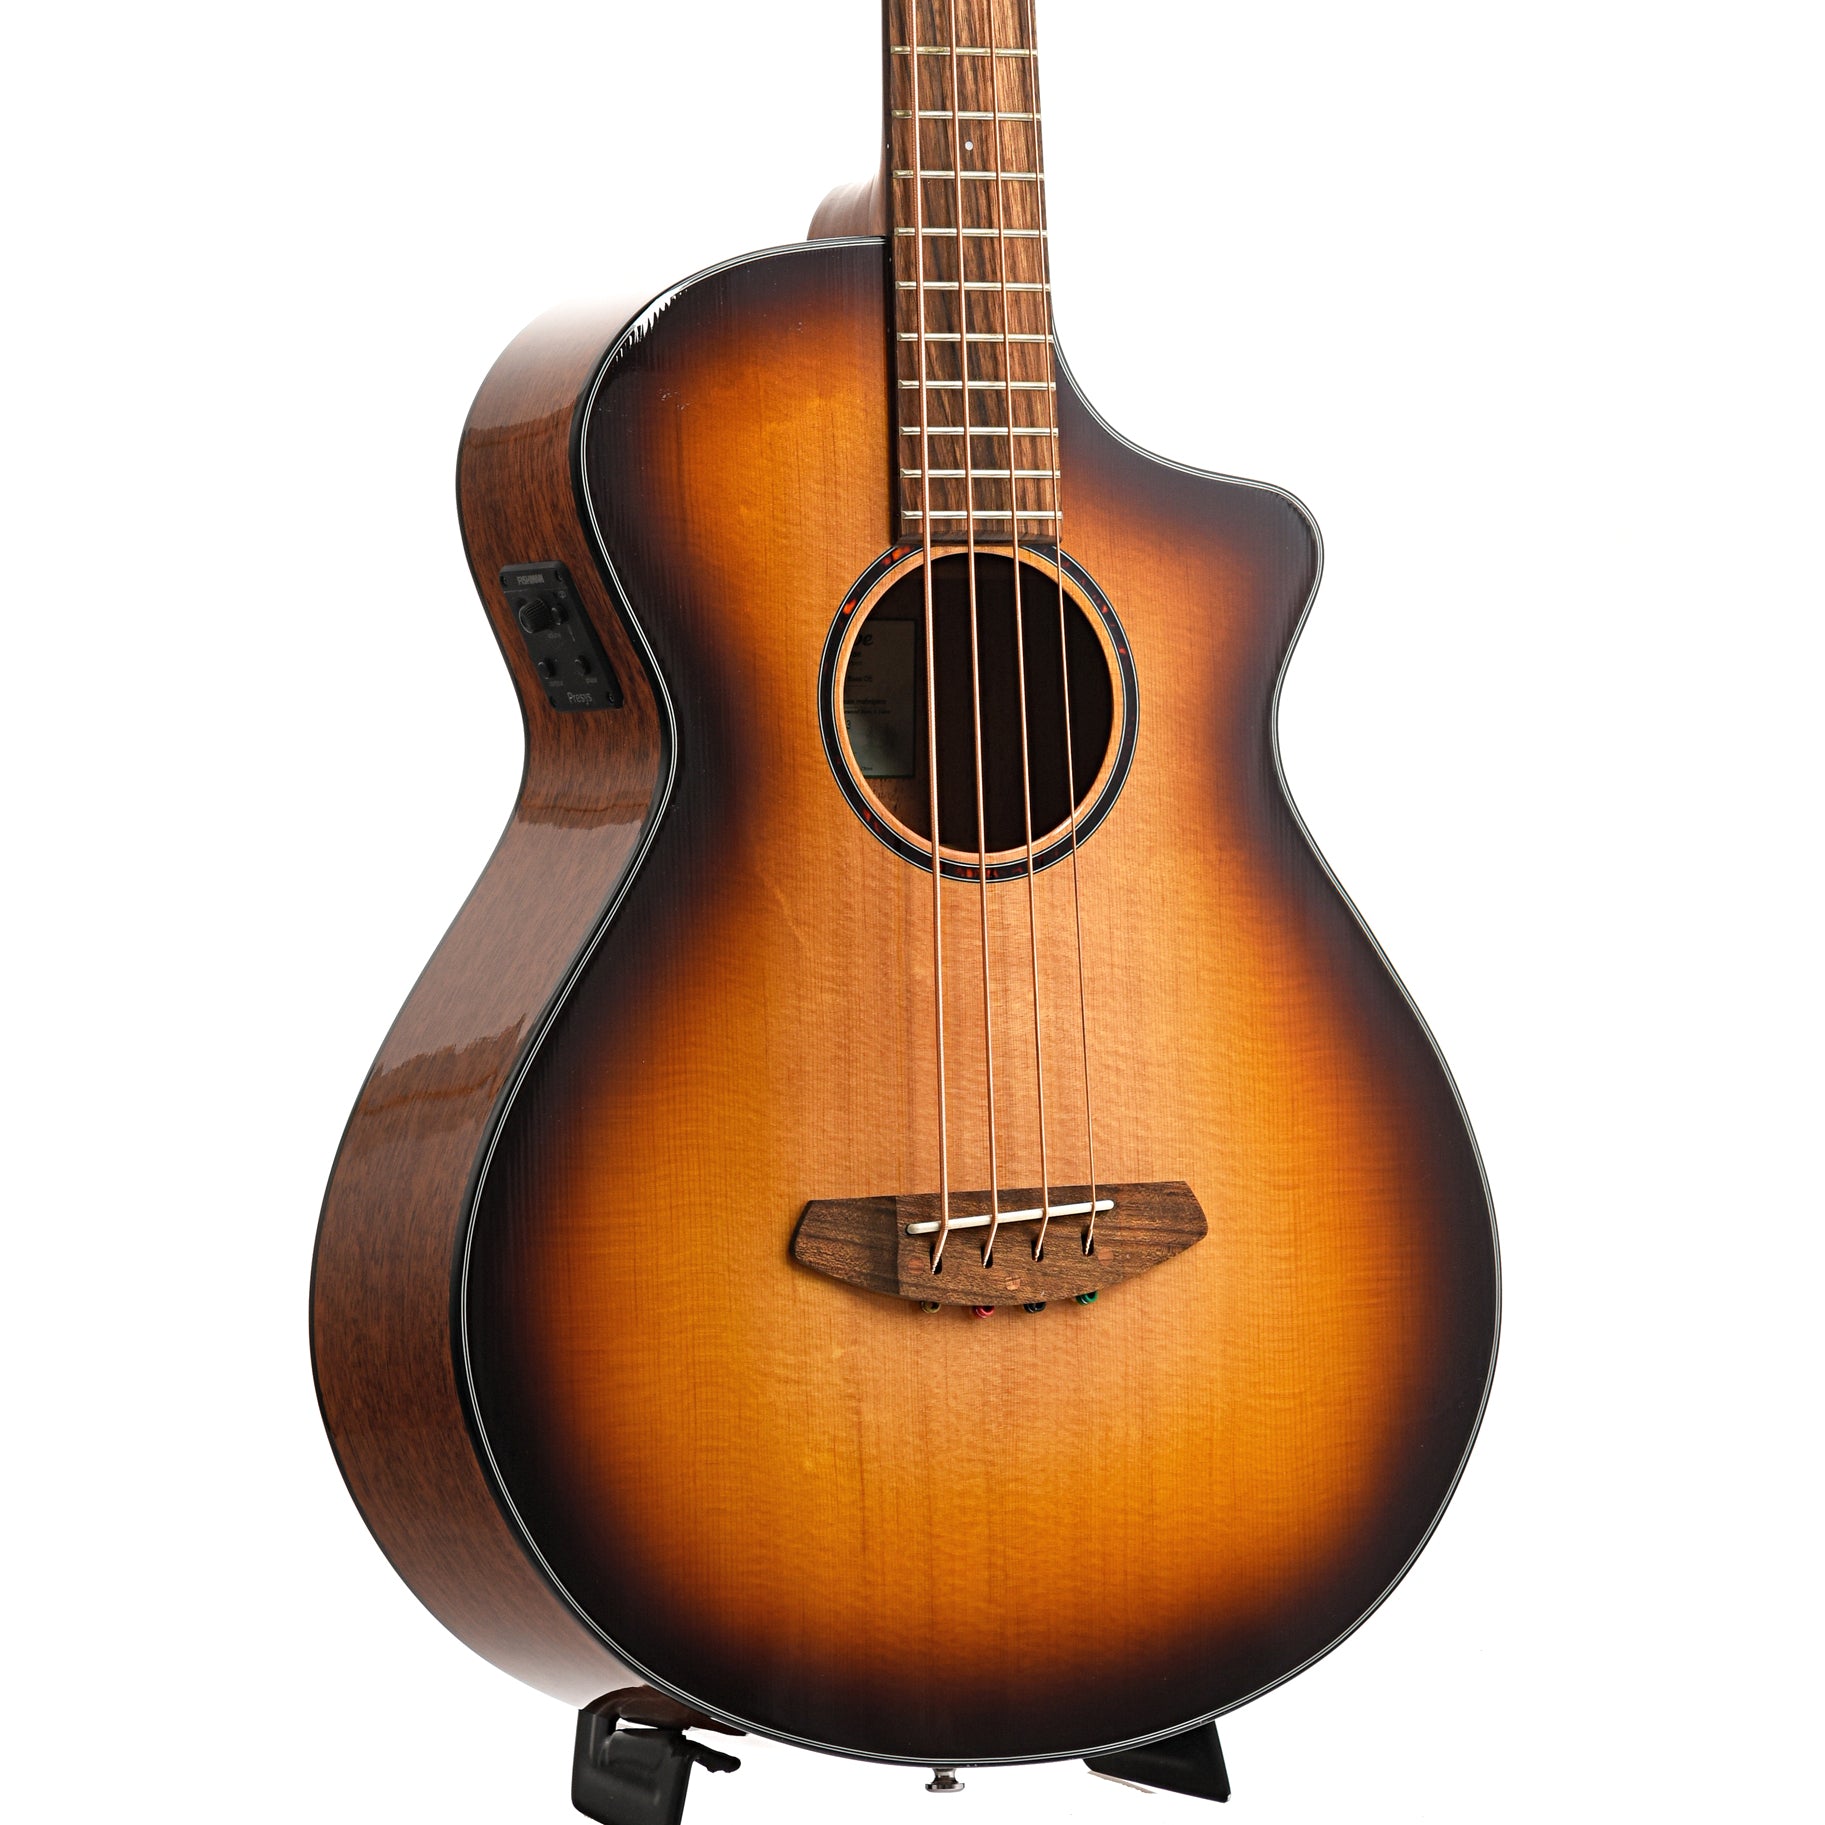 Image 3 of Breedlove Discovery S Concert Edgeburst Bass CE Sitka-African Mahogany Acoustic-Electric Bass Guitar - SKU# DSCN44BCESSAM : Product Type Flat-top Guitars : Elderly Instruments